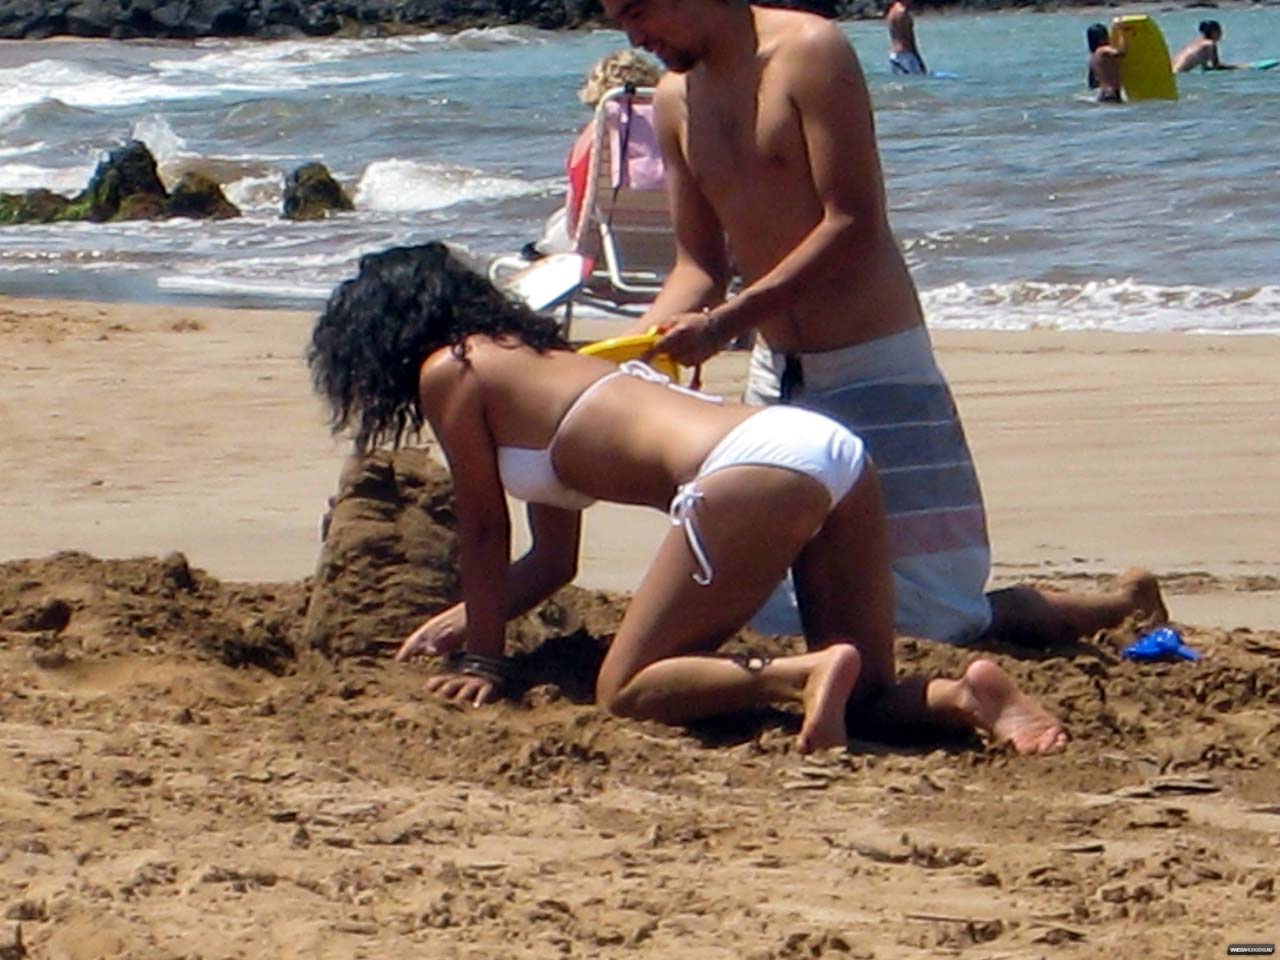 Vanessa Hudgens making a sandcastle with zac efron